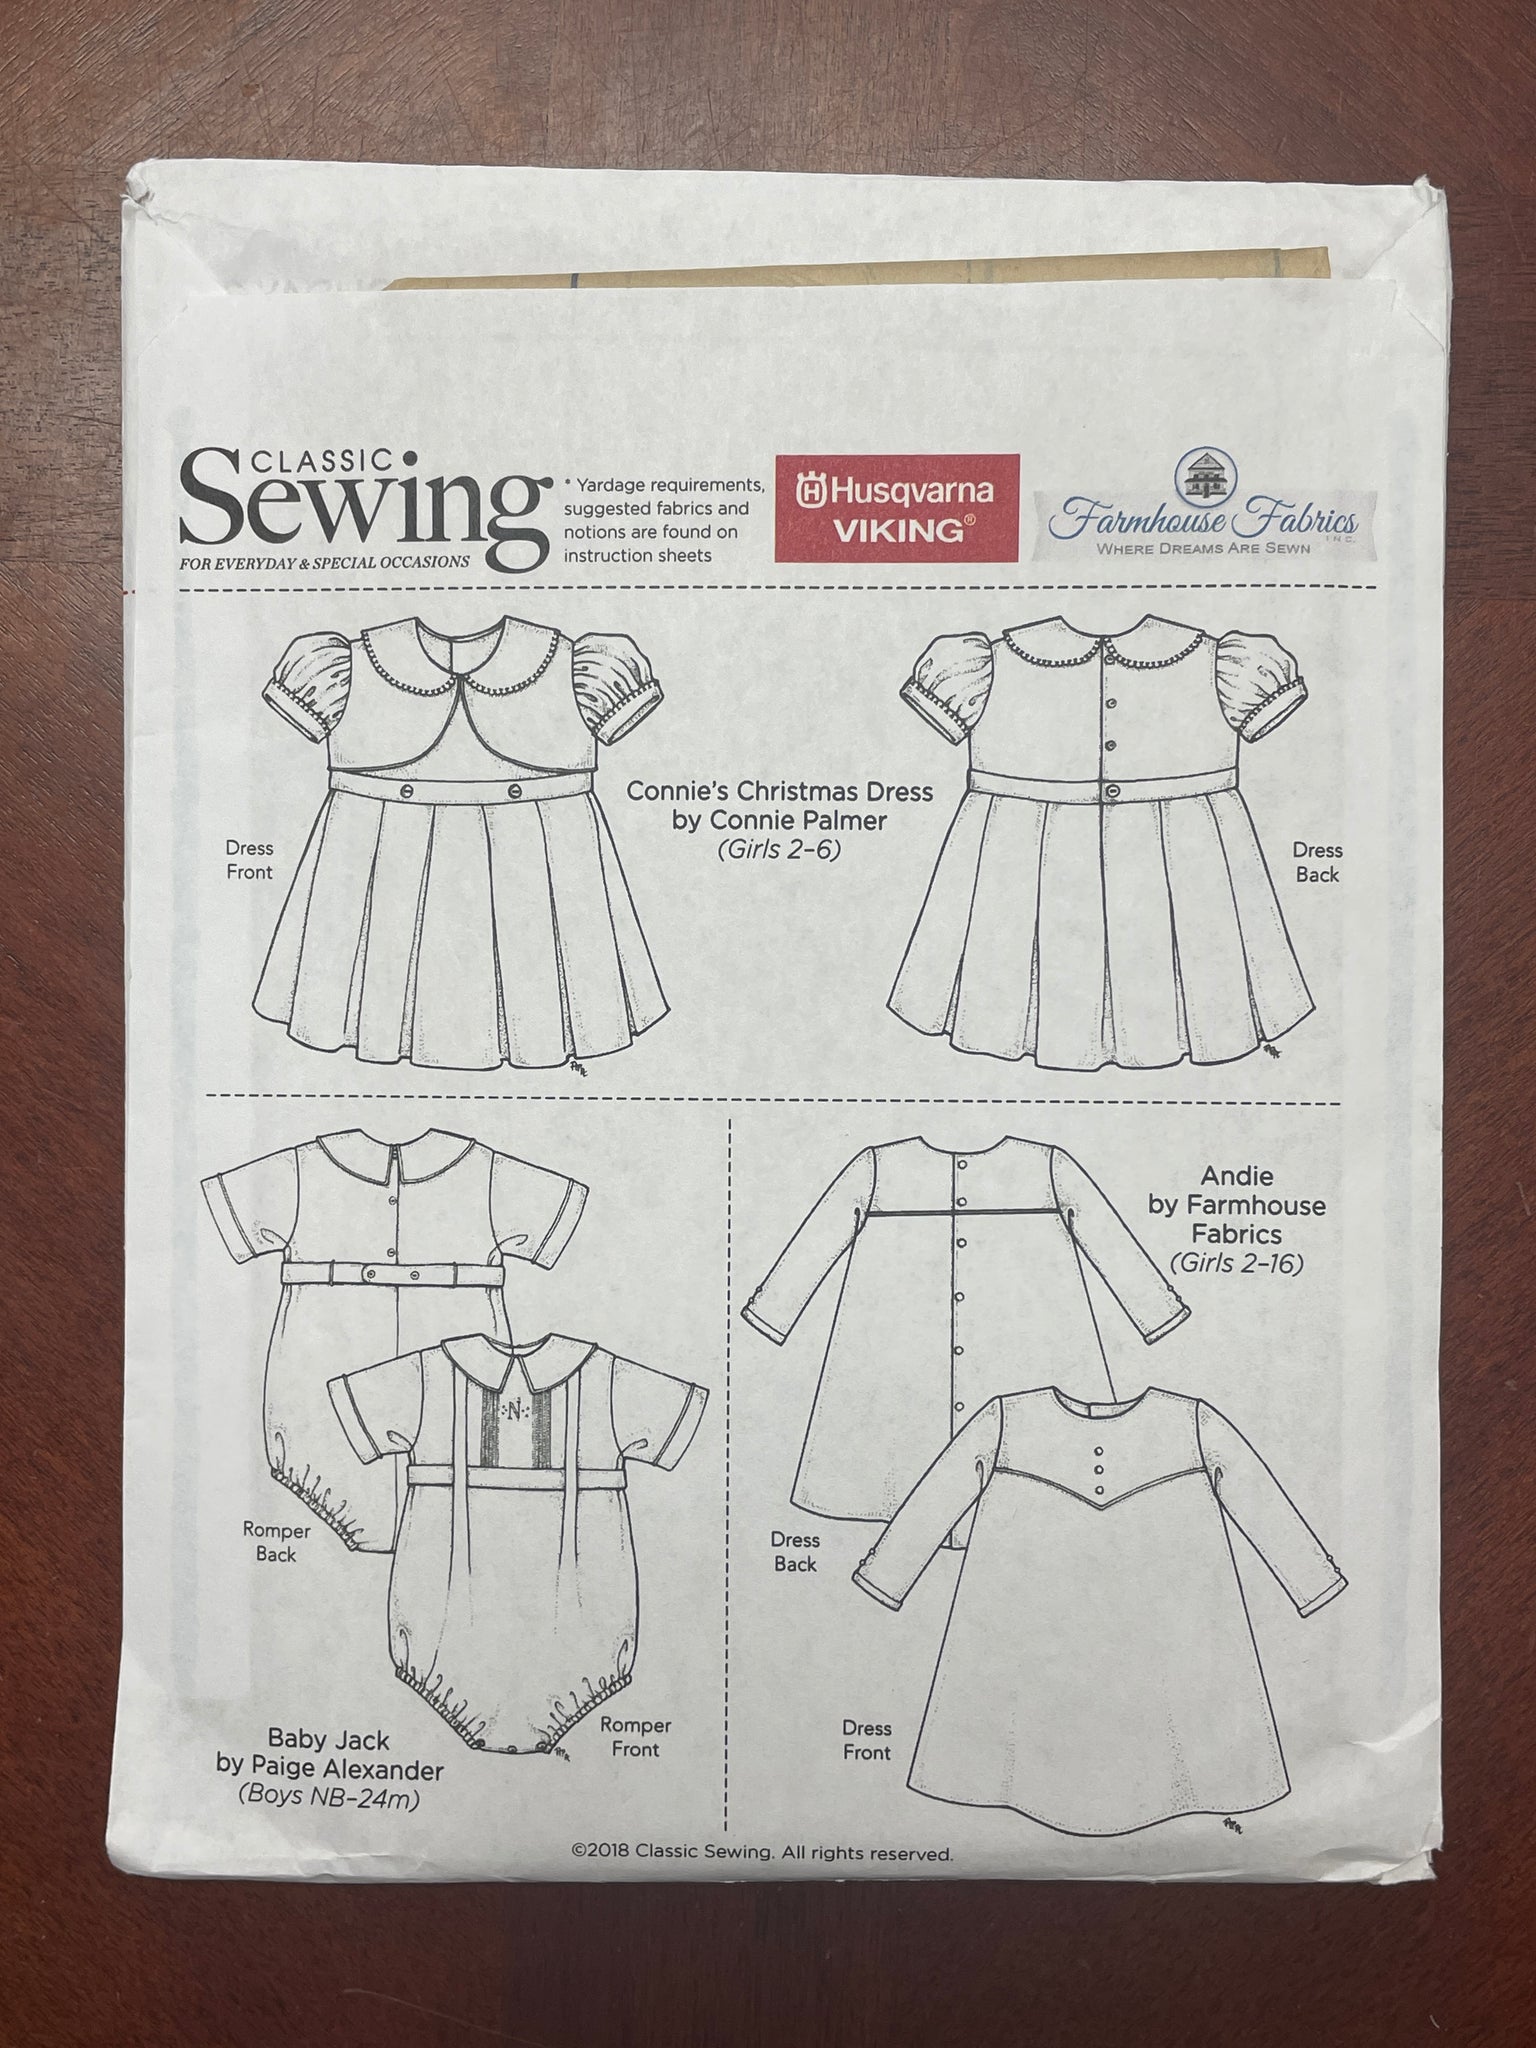 2018 Classic Sewing Holiday 2018 Pattern - Dresses and Romper FACTORY FOLDED